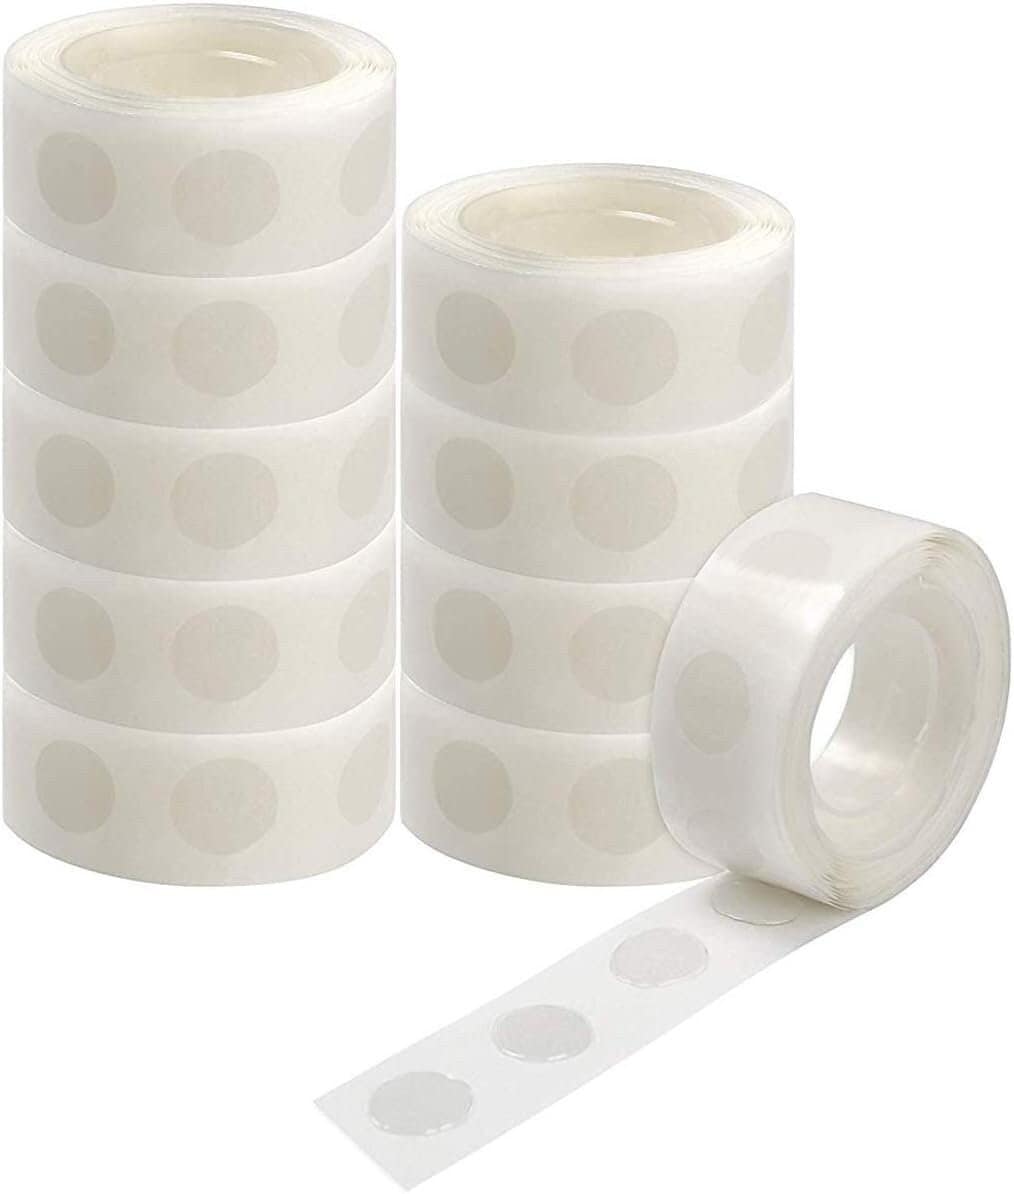 100 Glue Adhesive Dots, Glue Points on A Roll, Balloon Dots